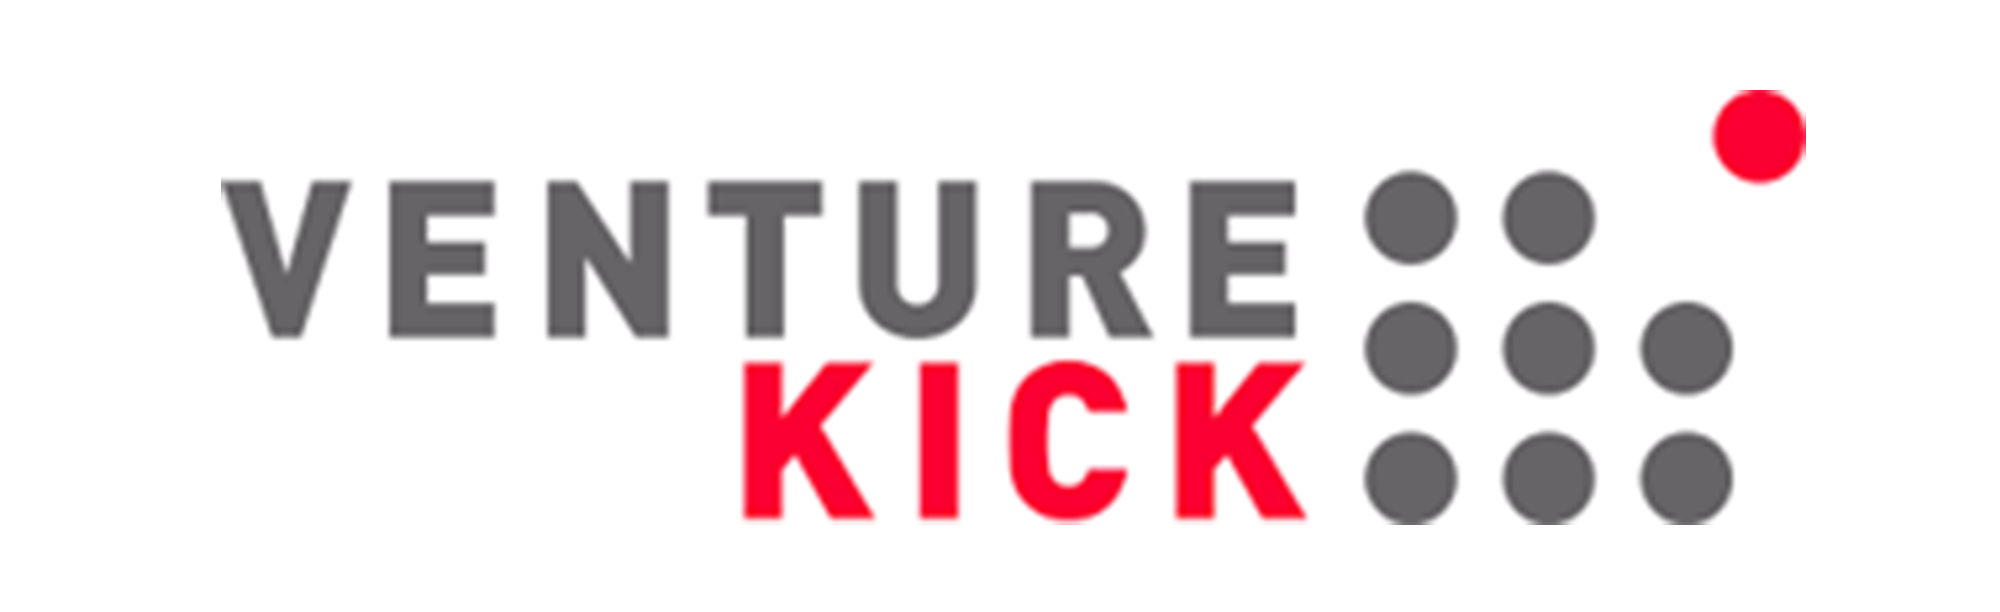 Venture Kick: scoring a hat trick and receiving further investments